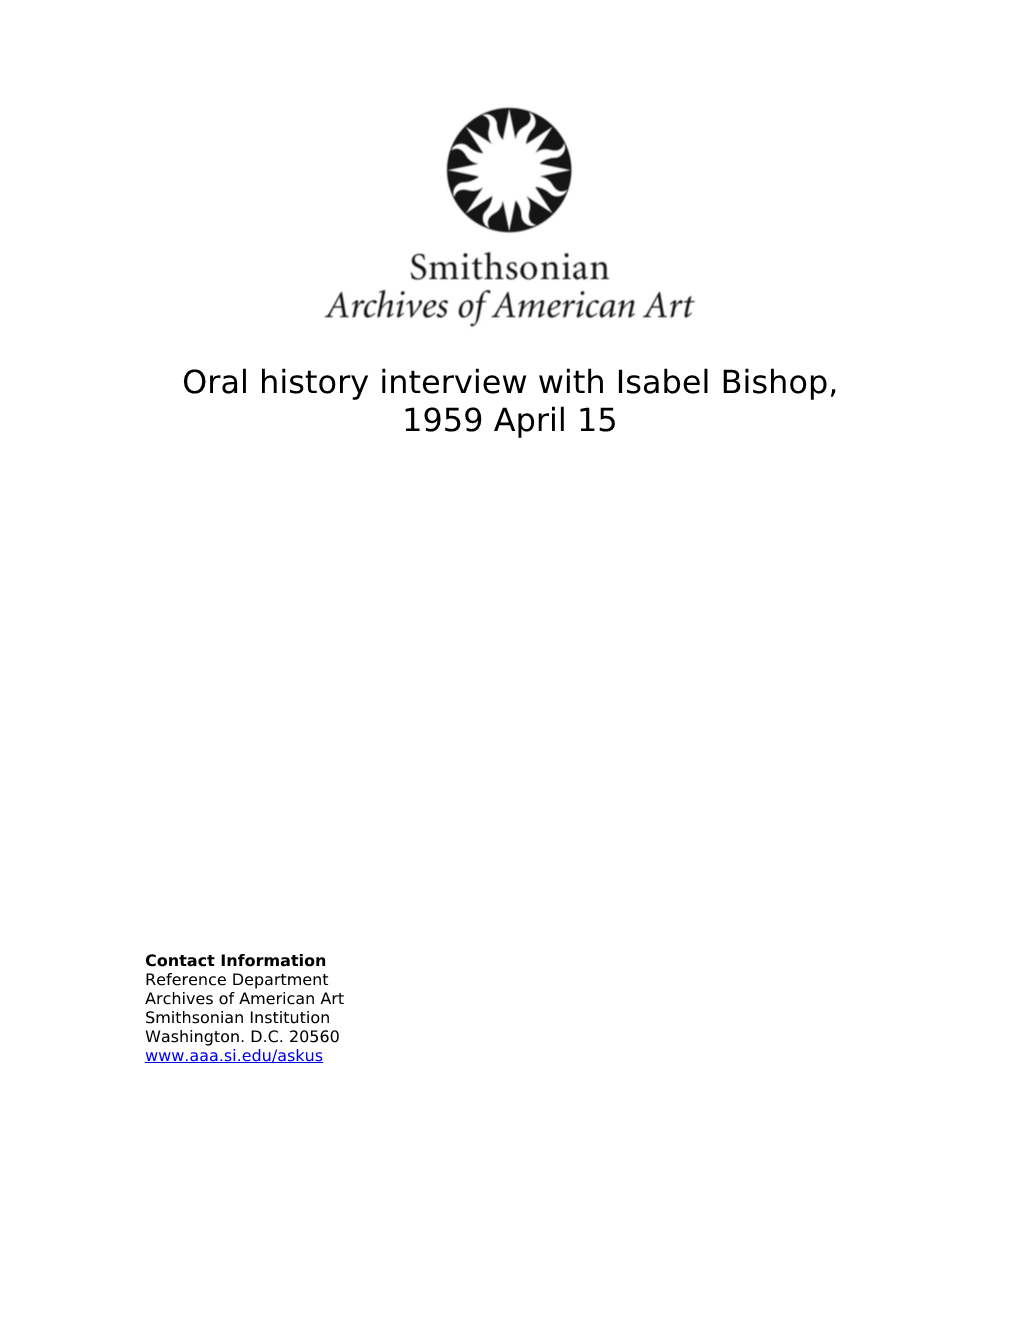 Oral History Interview with Isabel Bishop, 1959 April 15